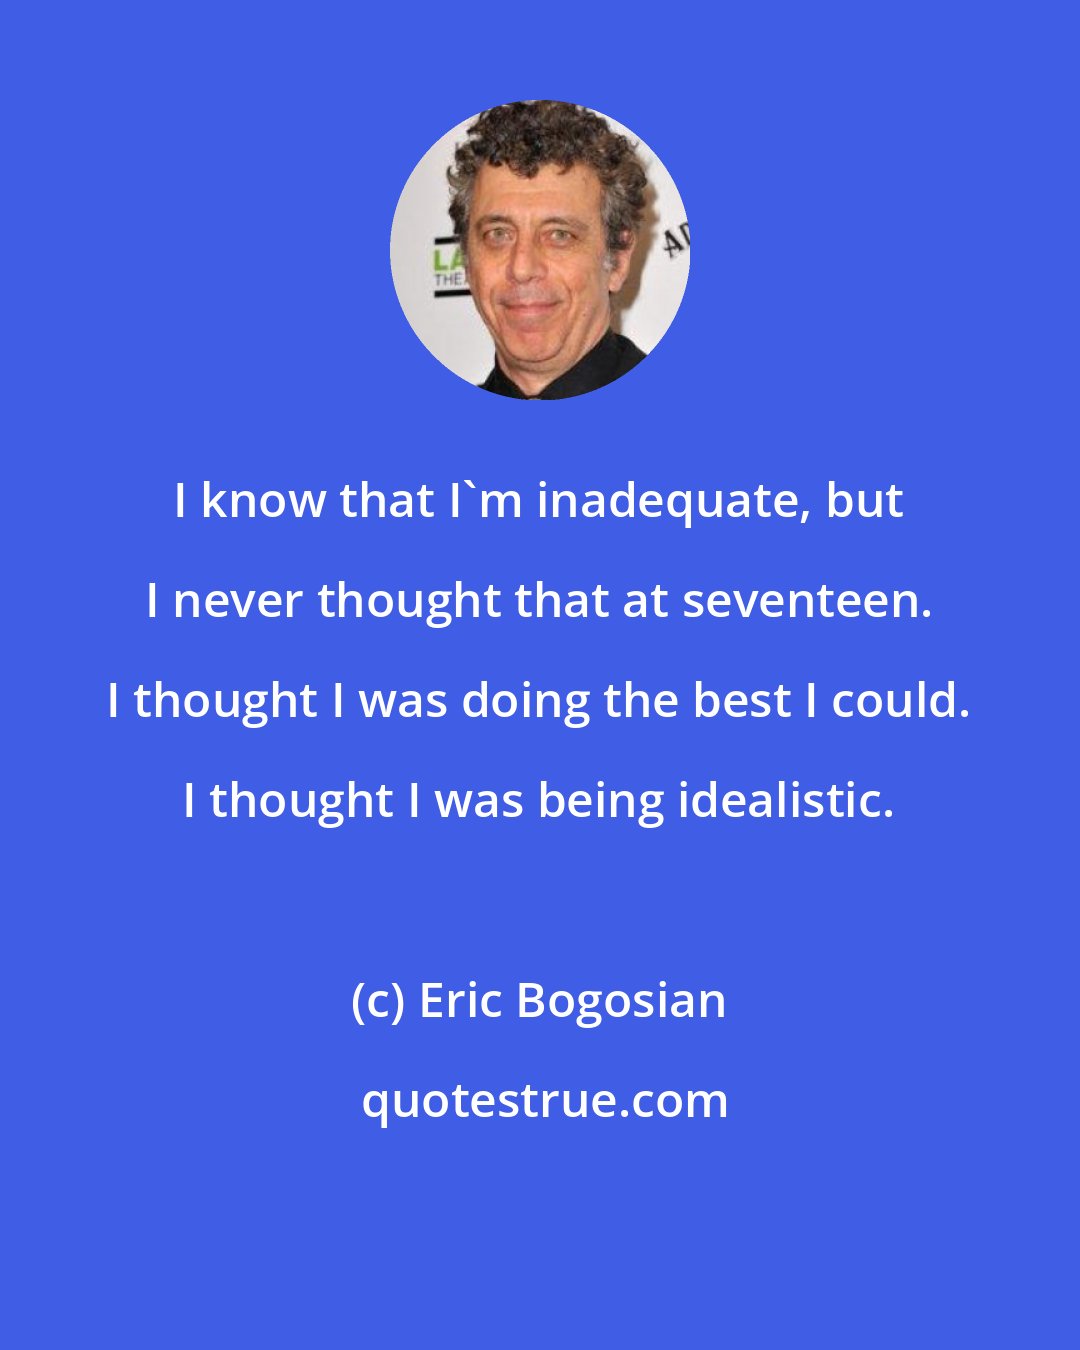 Eric Bogosian: I know that I'm inadequate, but I never thought that at seventeen. I thought I was doing the best I could. I thought I was being idealistic.